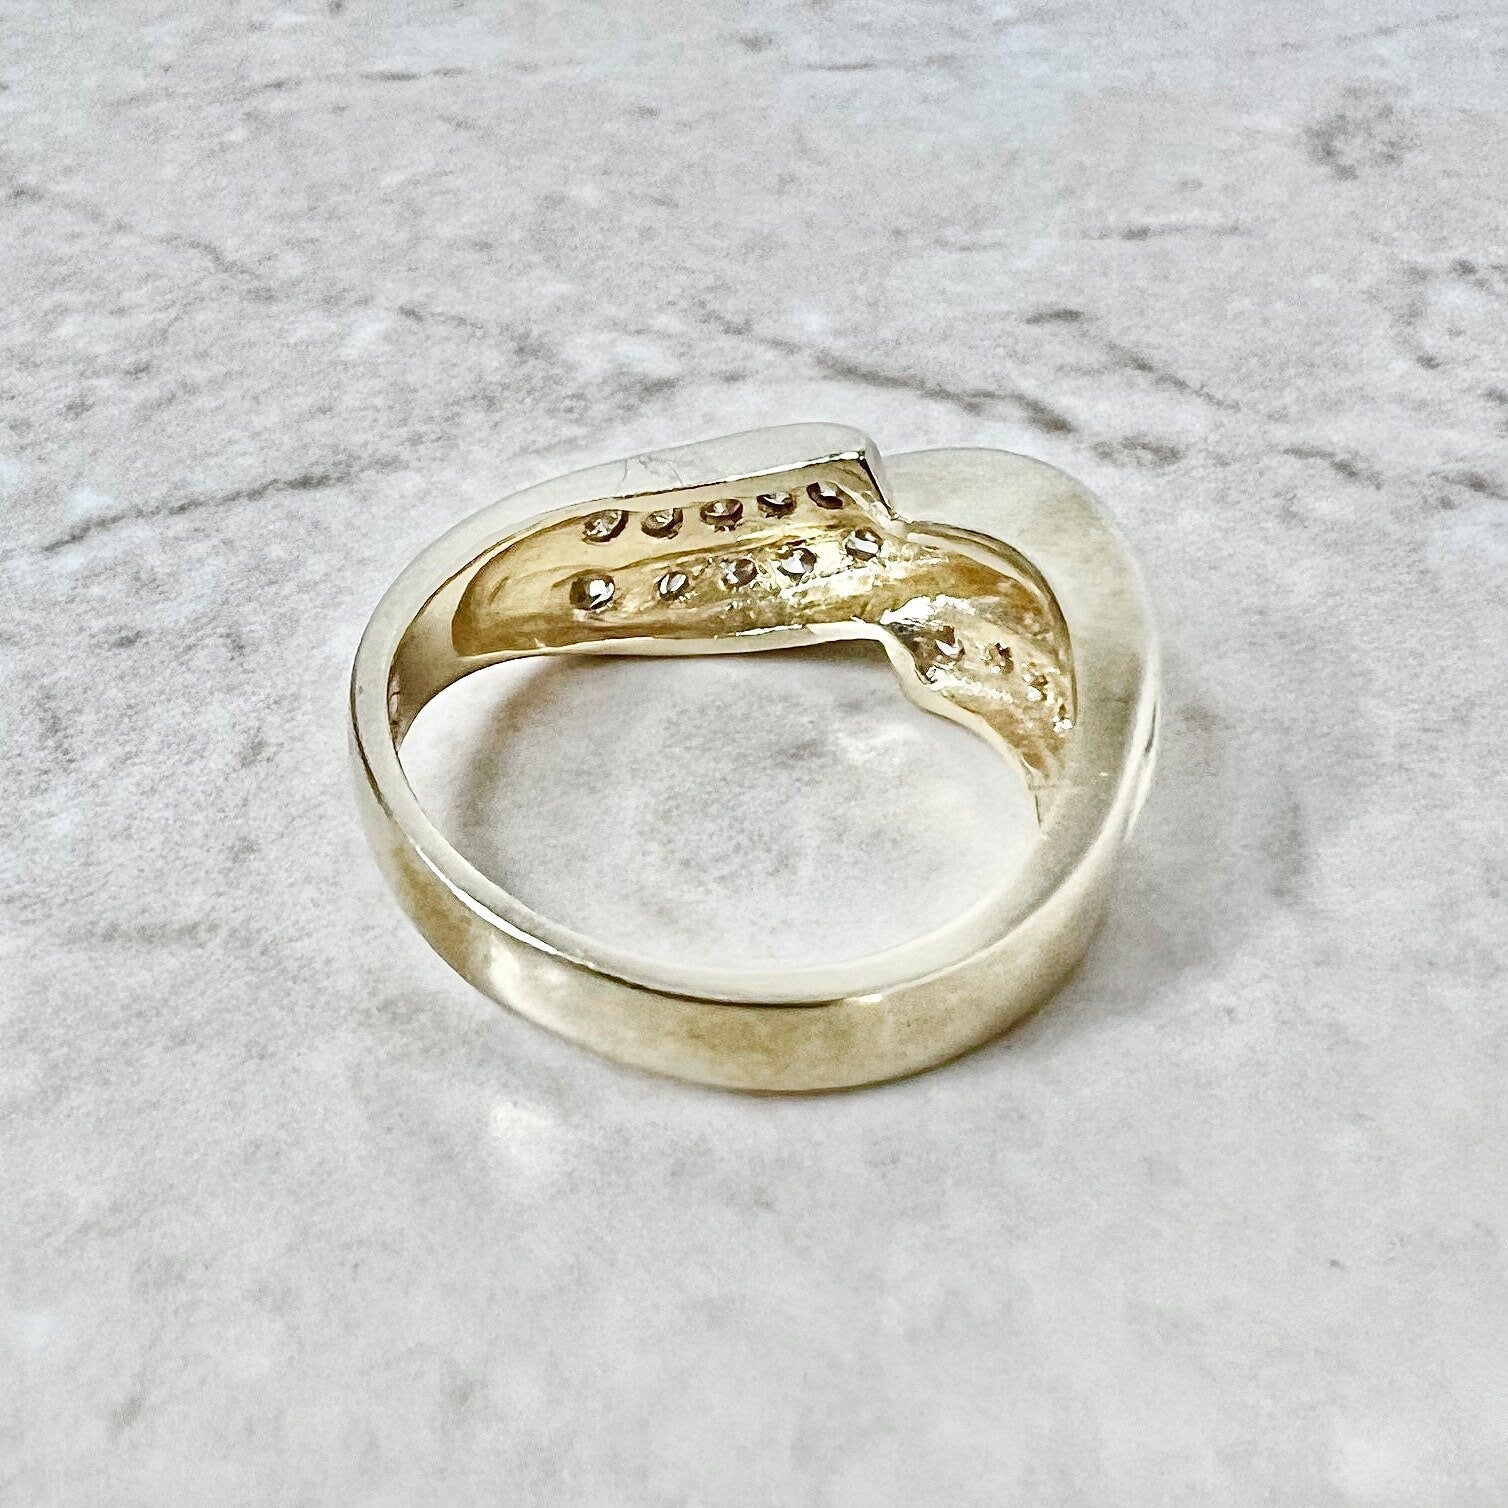 Vintage 14K Diamond Cocktail Band Ring - Yellow Gold Diamond Ring - Wedding Ring - Birthday Gift For Her - Best Gift - Holiday Gift